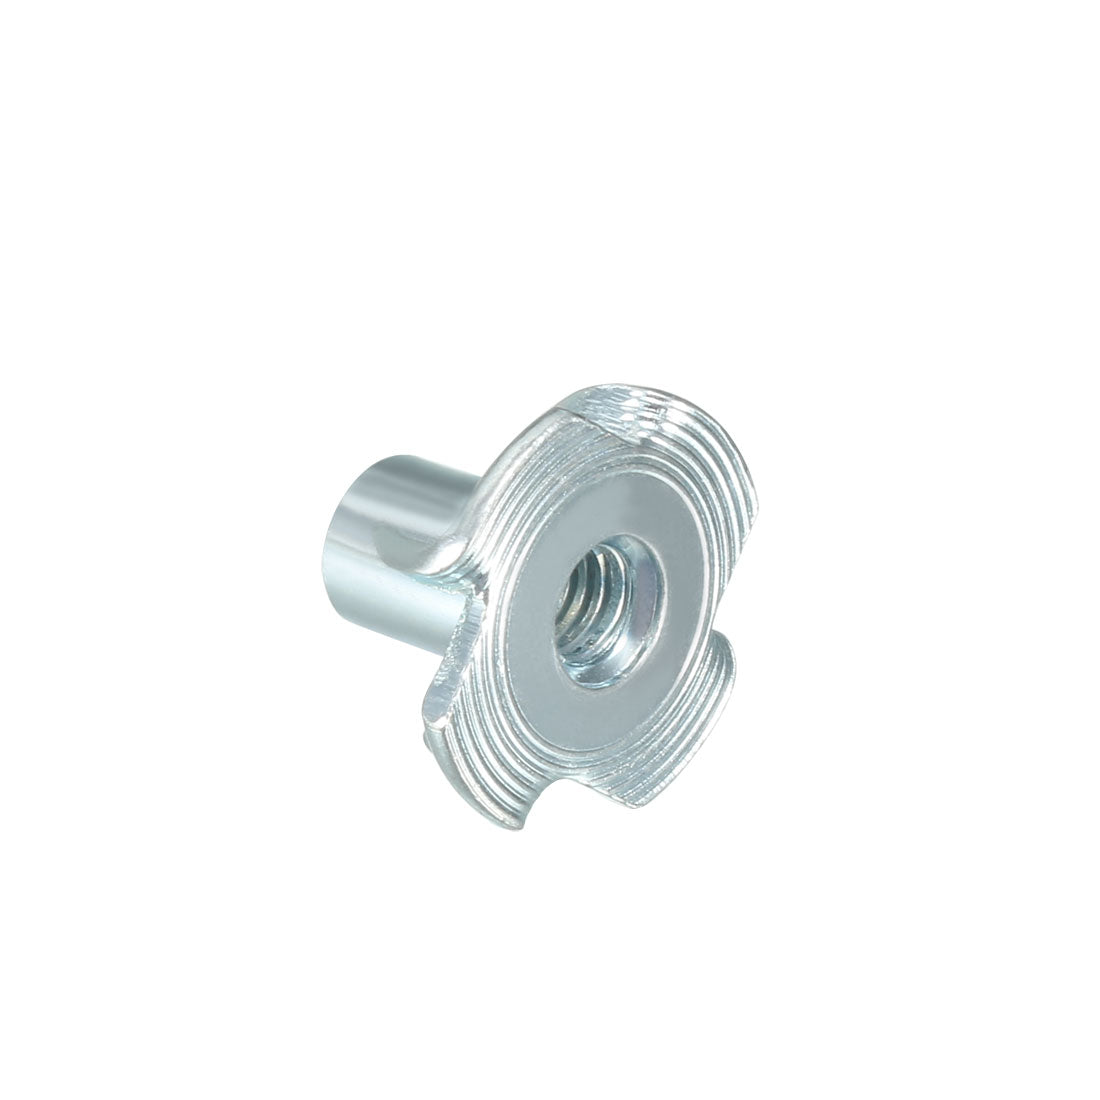 uxcell Uxcell 4 Pronged Tee Nut T-Nuts